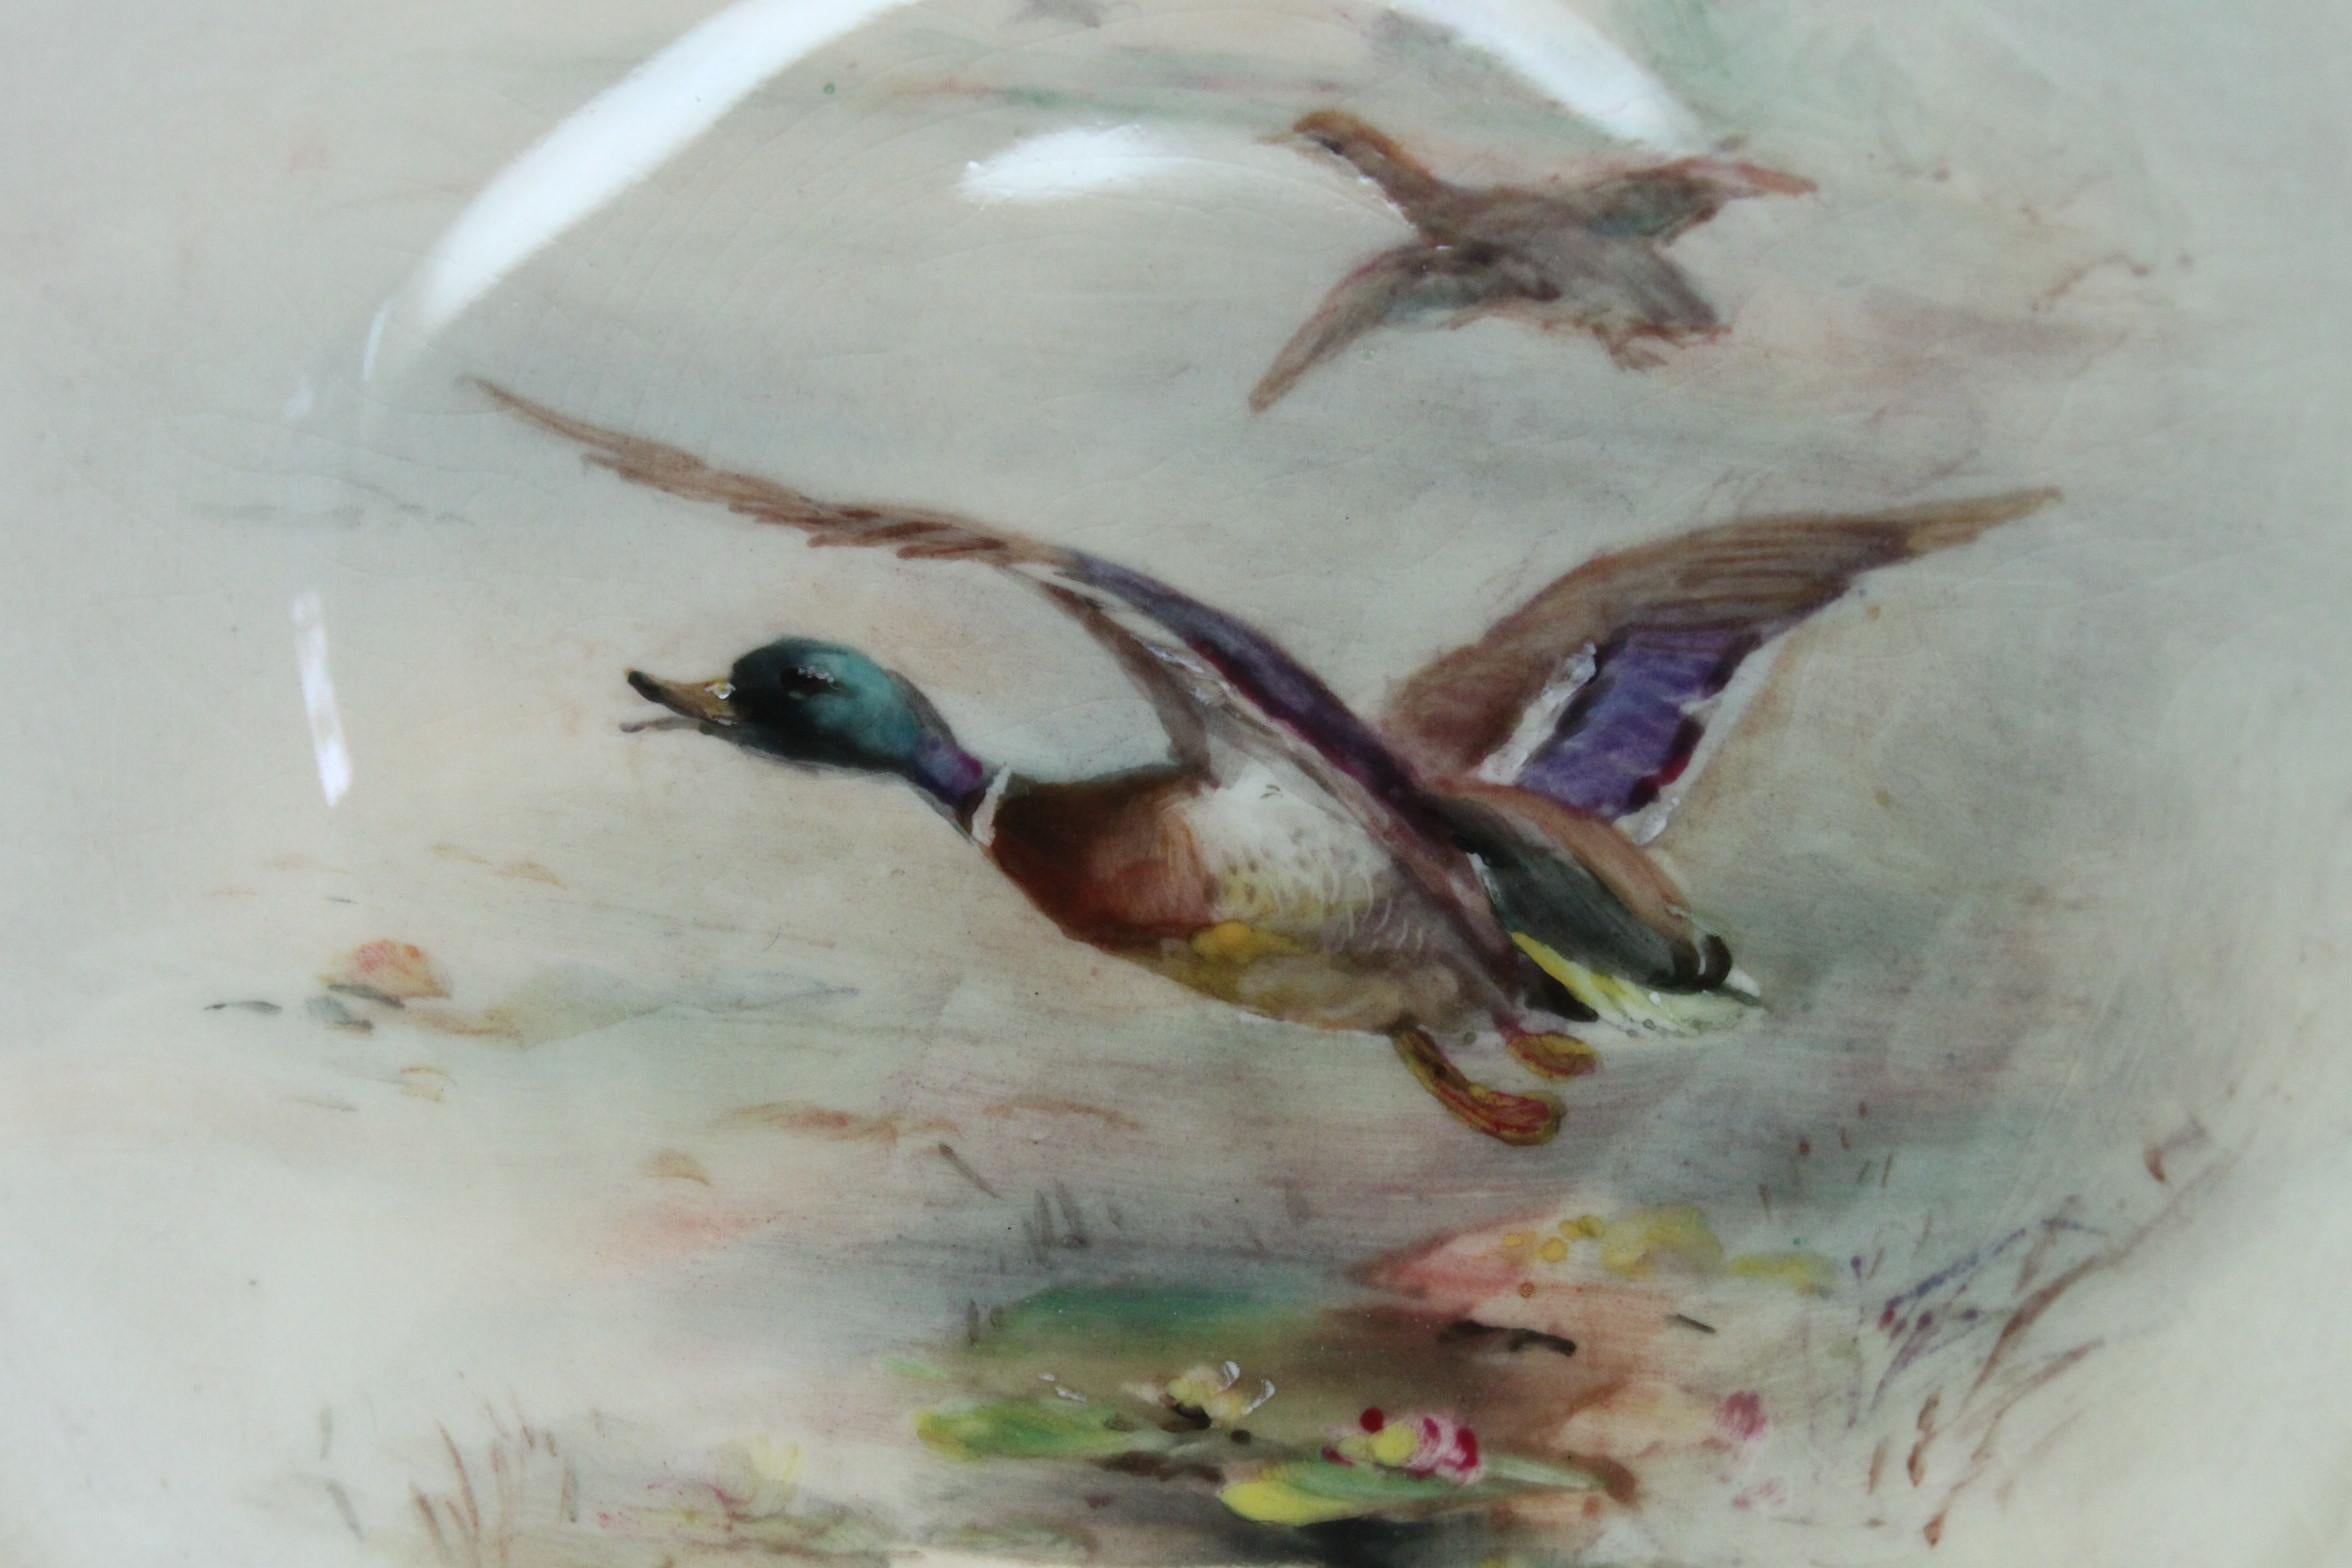 This Royal Worcester footed dish was painted by James Stinton (1870-1961) and features a pair of ducks in flight. The son of John Stinton senior, James Stinton was a member of the famed Stinton family of porcelain painters whose history dated back